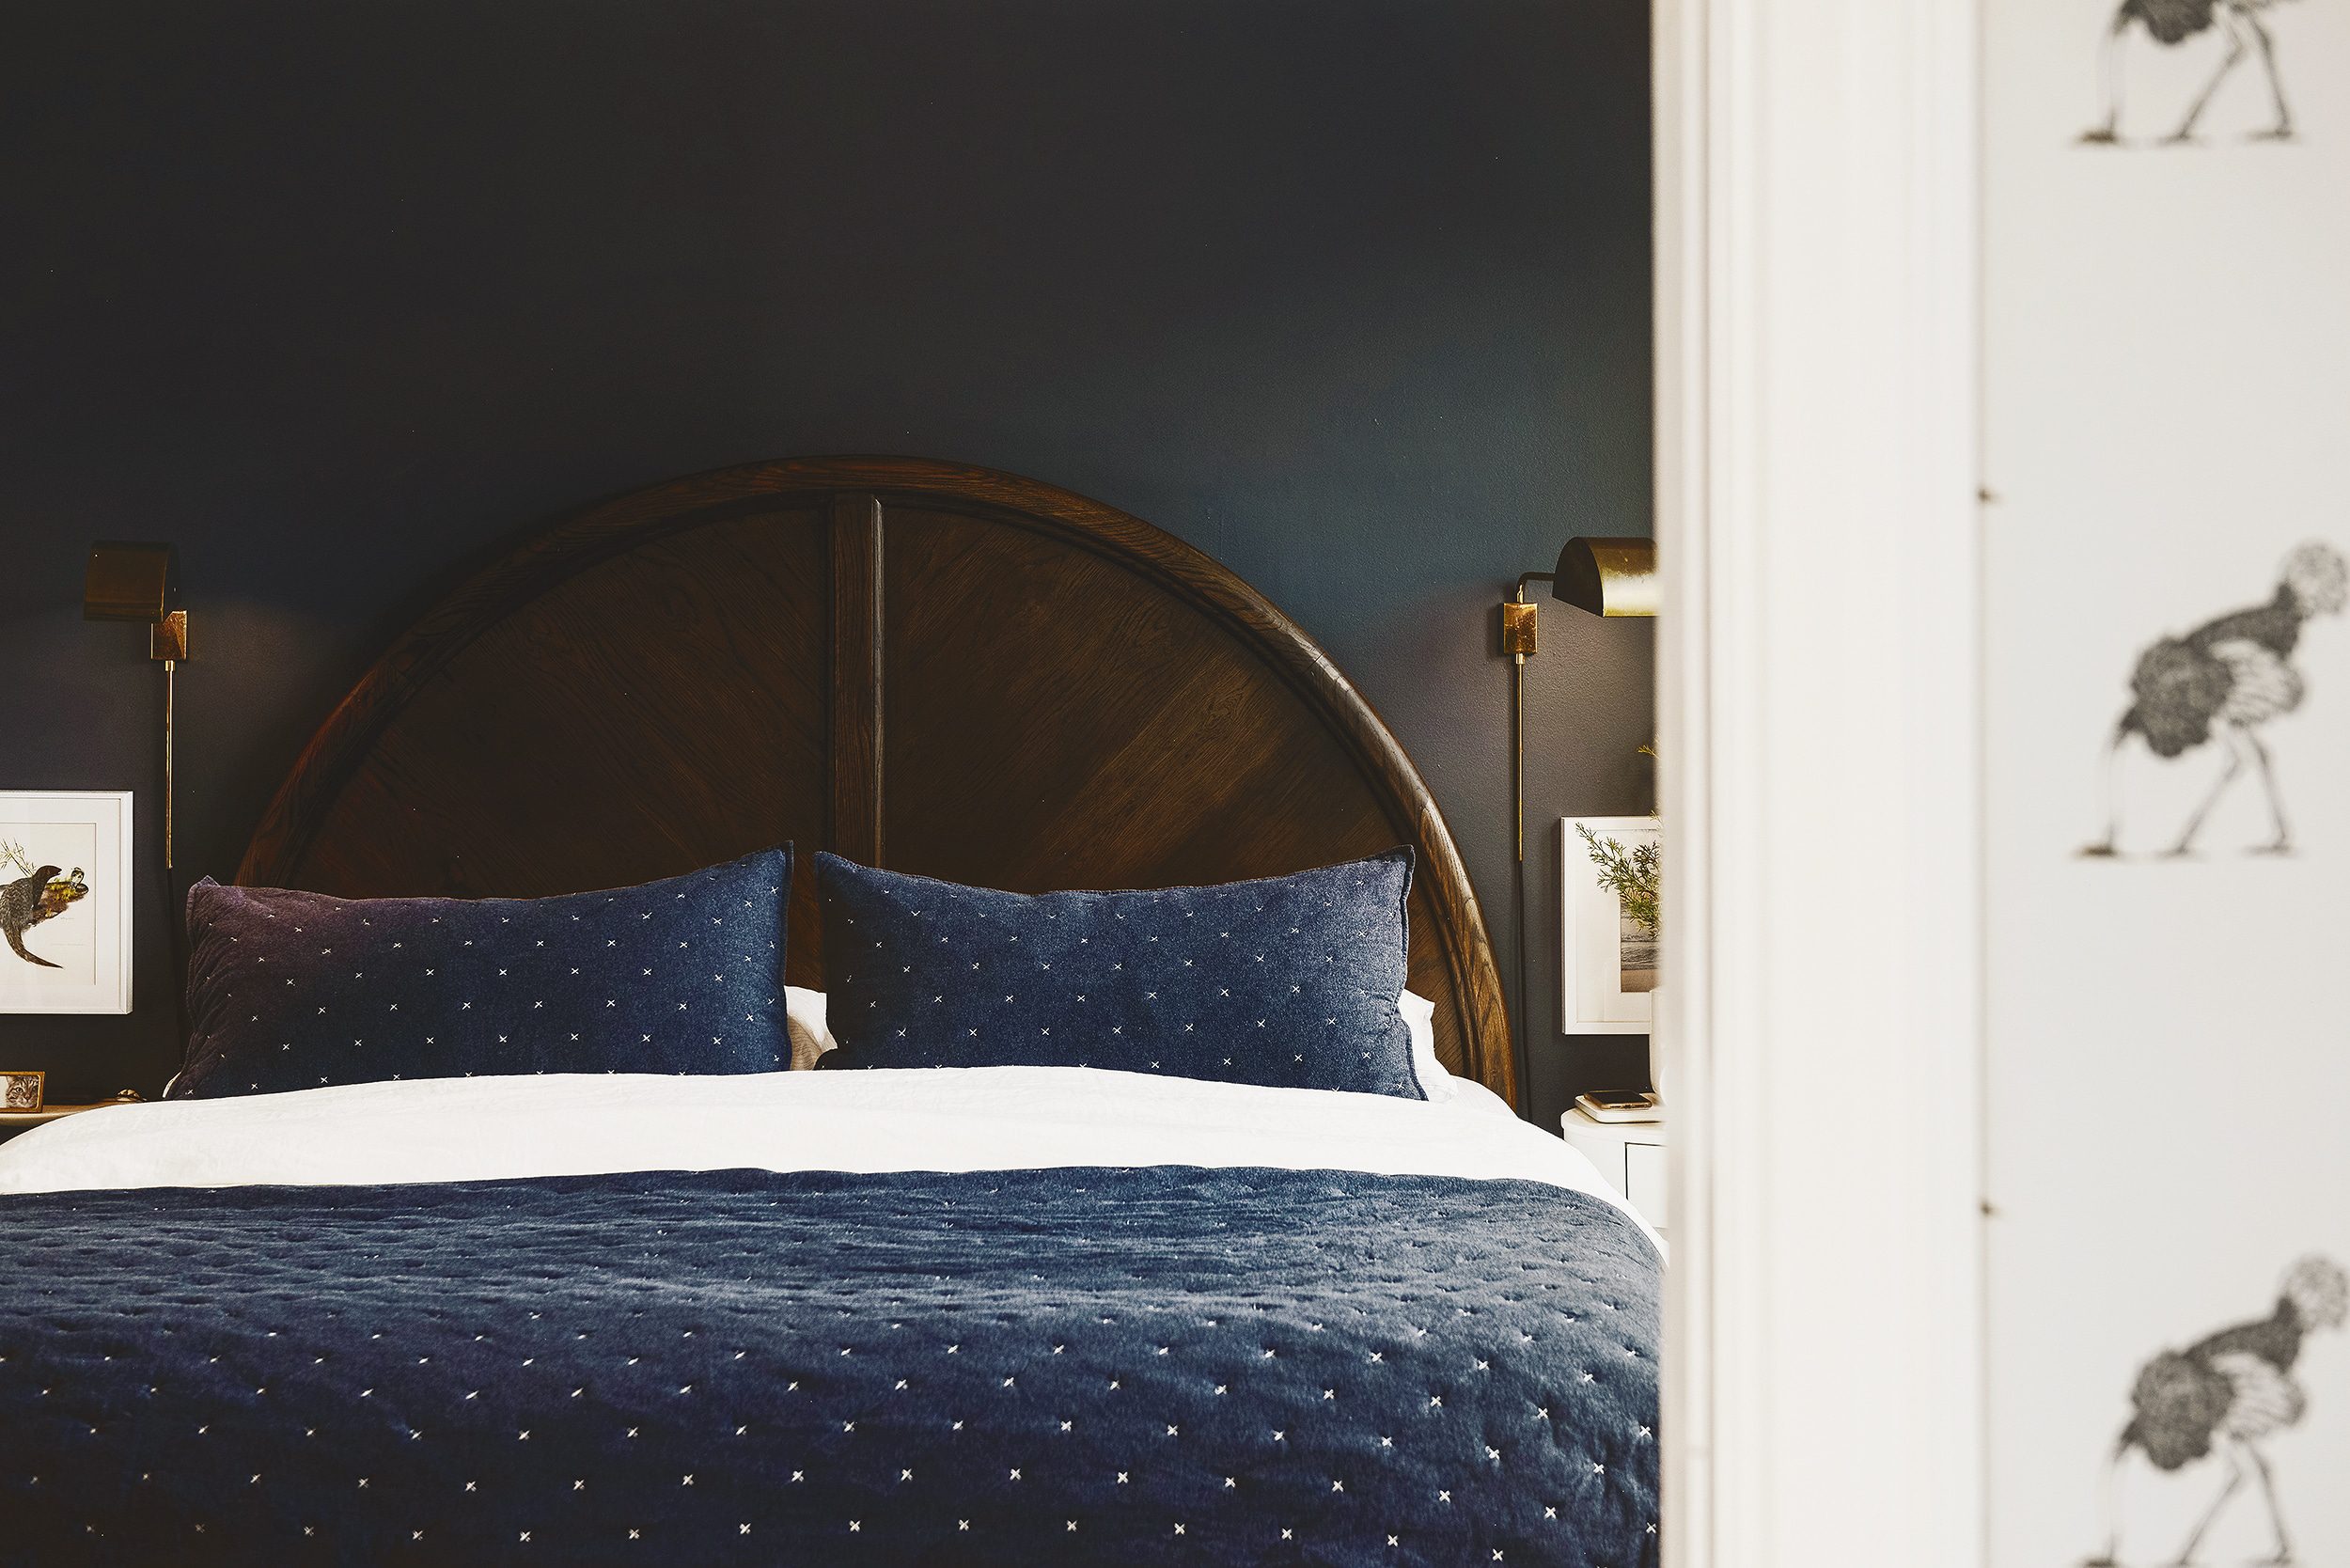 A moody bedroom with navy bedding and a large half-circle headboard | via Yellow Brick Home